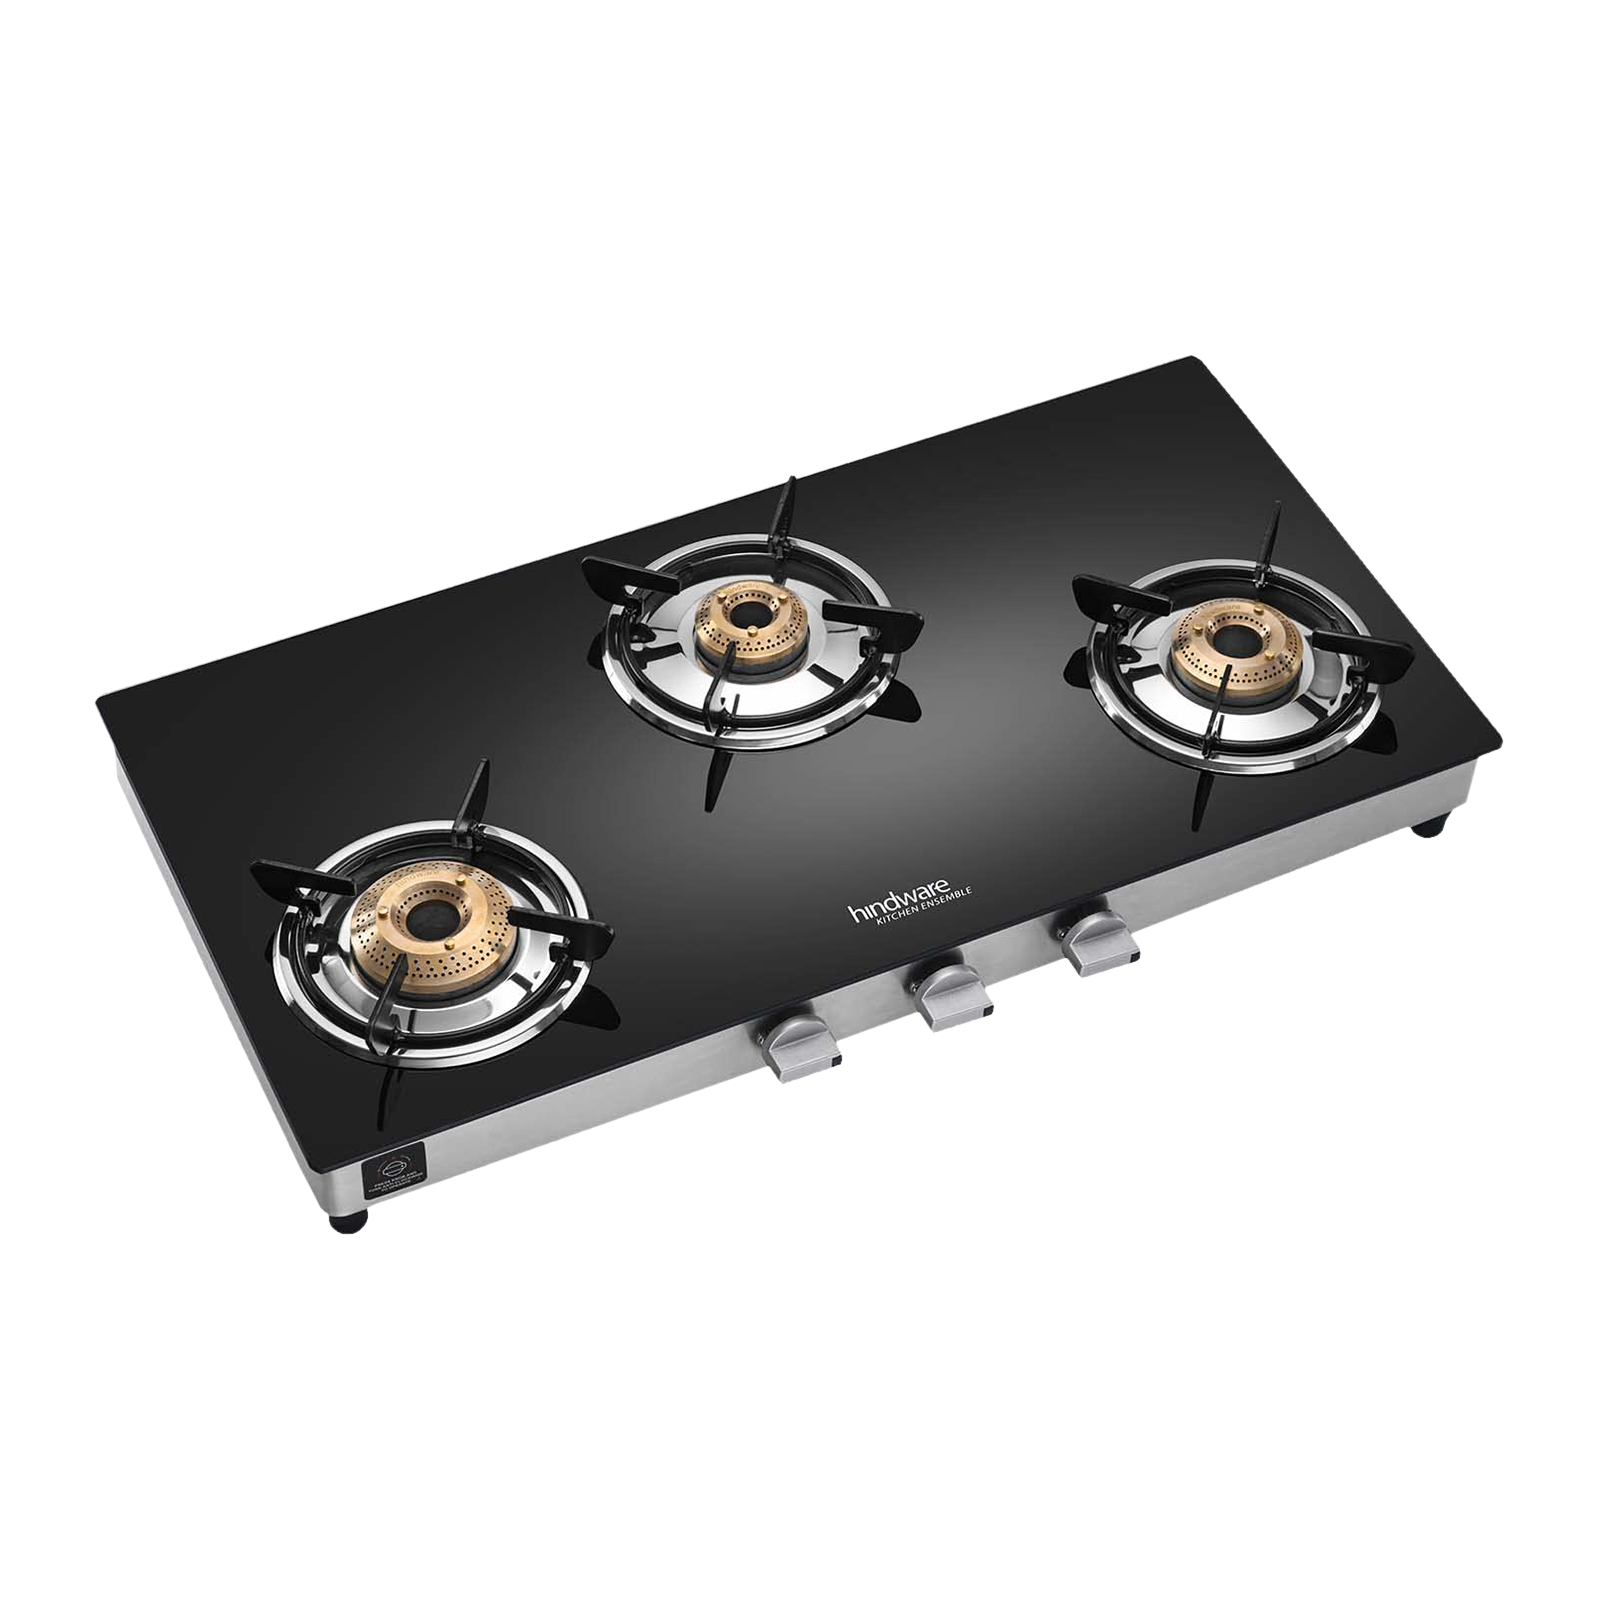 Hindware ARMO Plus 3 Burner Toughened Glass Gas Stove (Scratch Resistant, CT100211, Black)_1